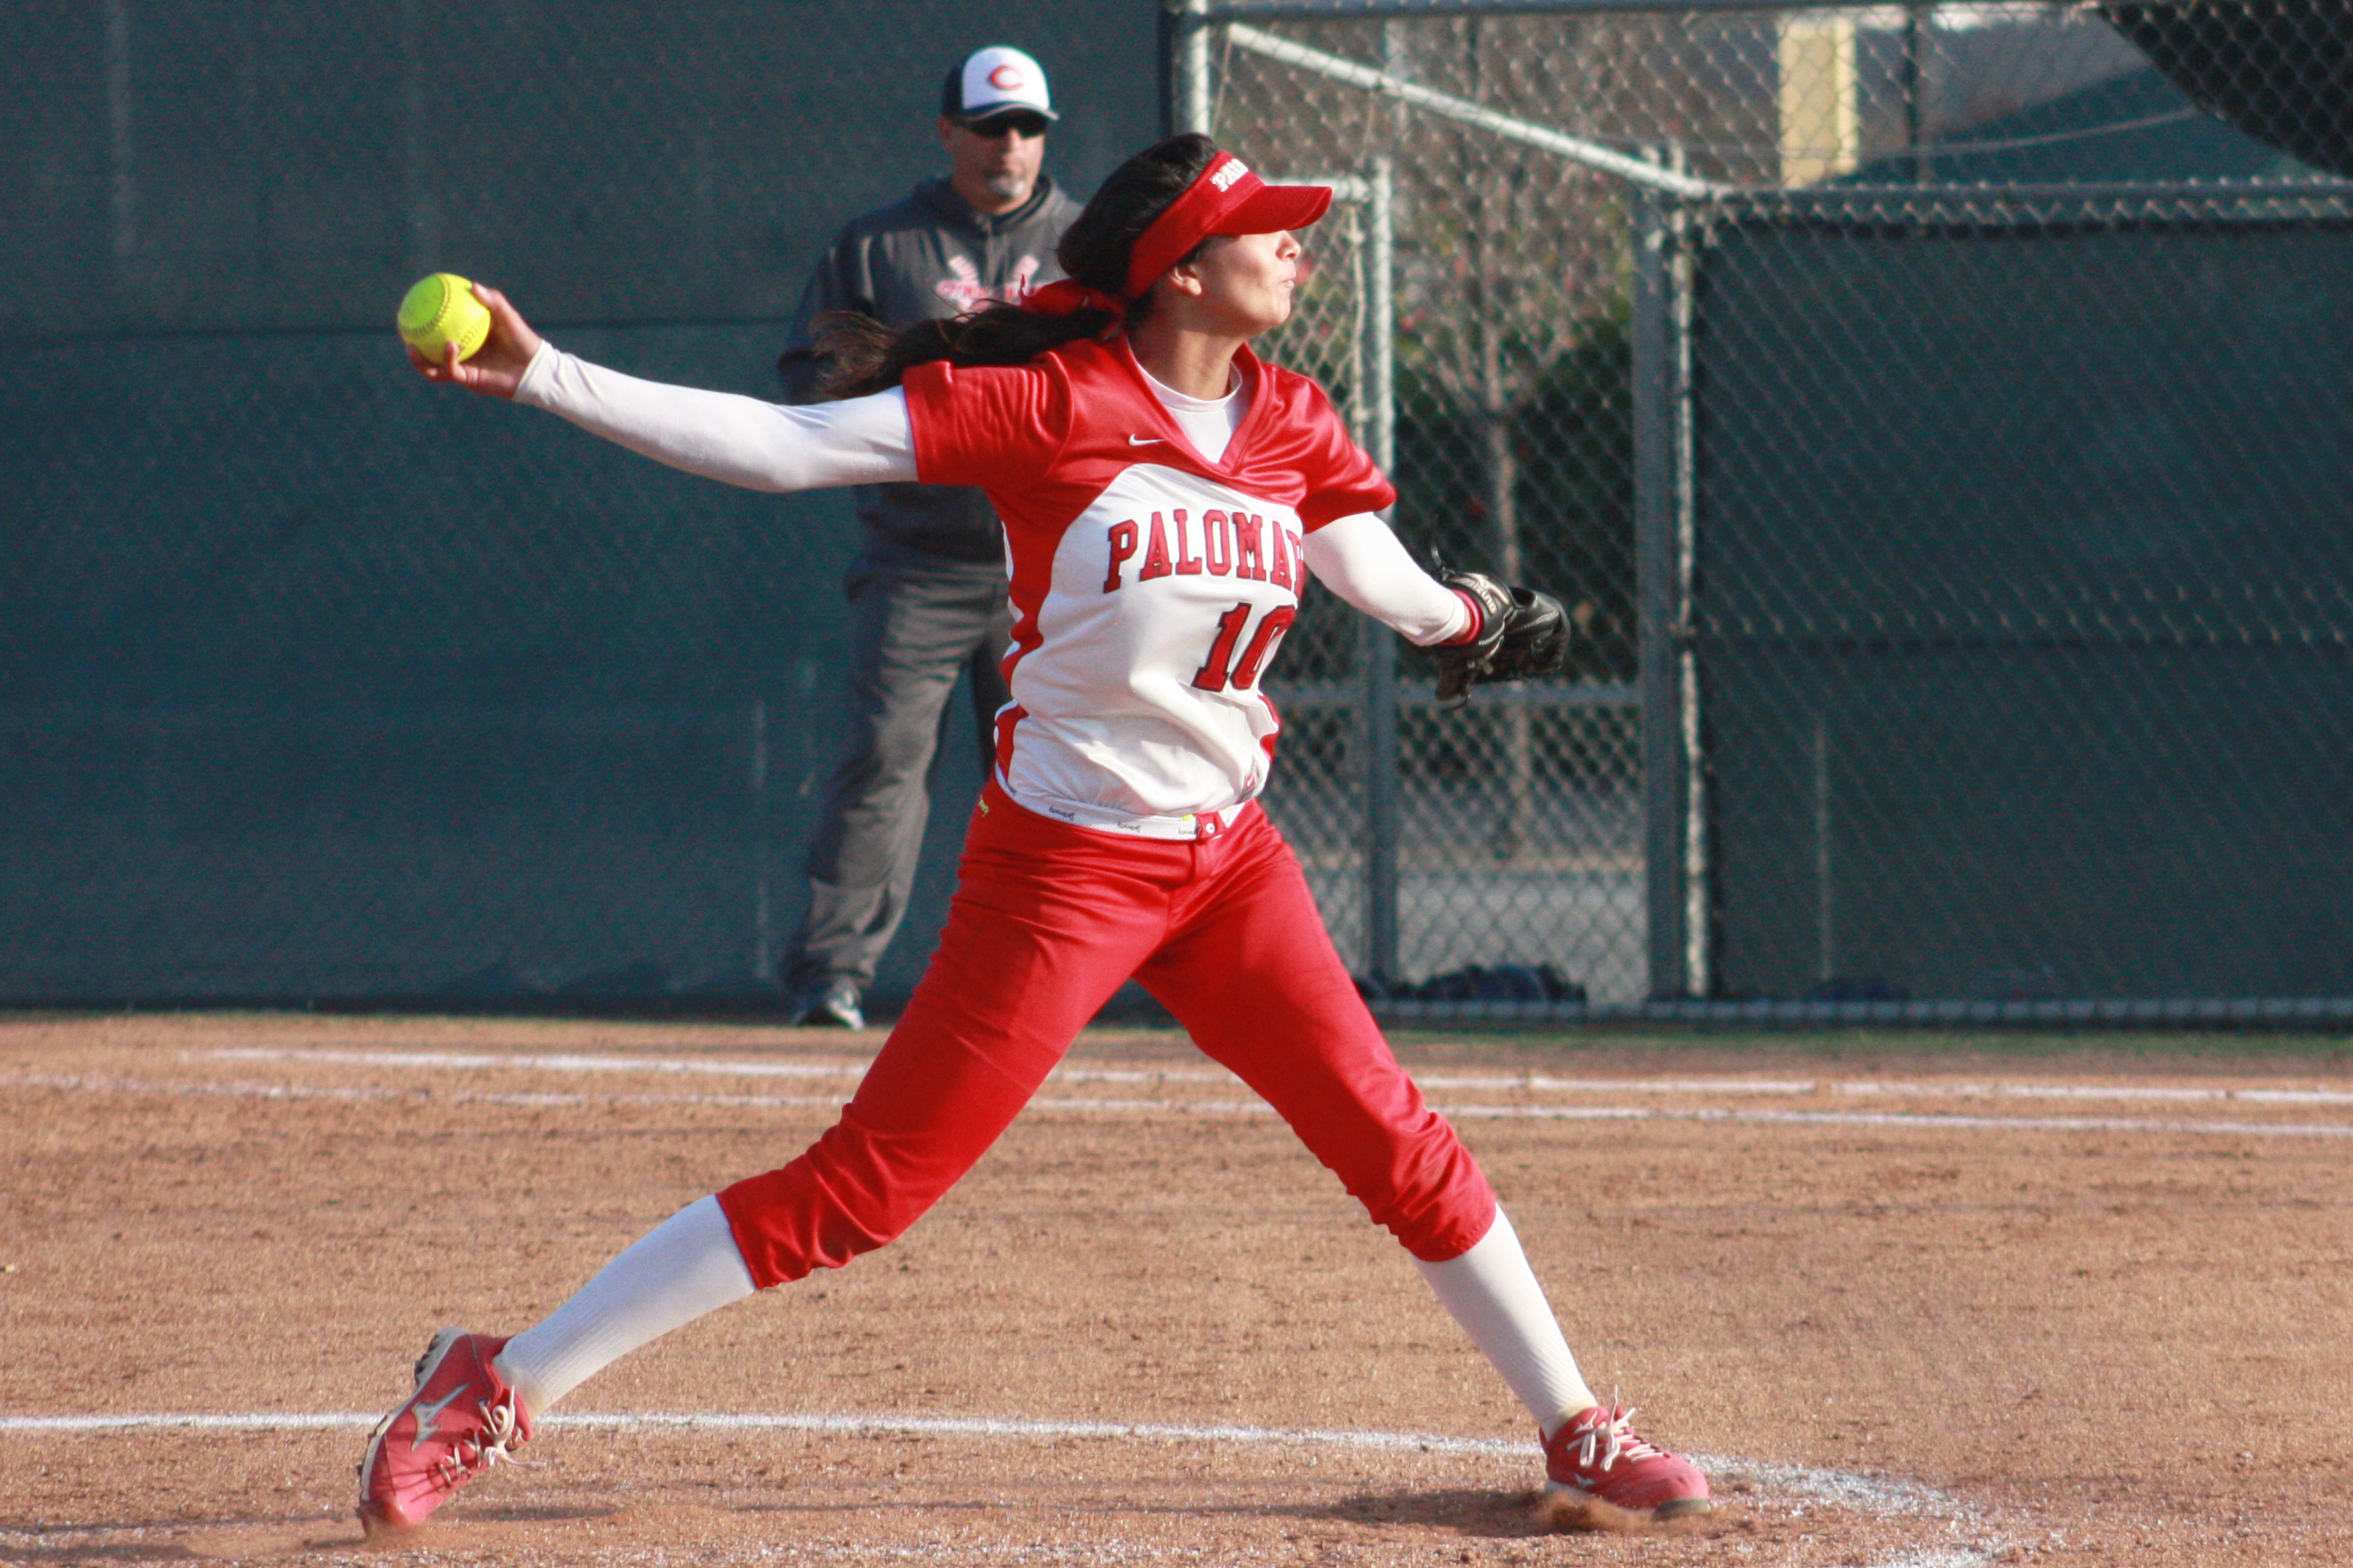 Palomar relief pitcher Kristina Carbajal throws a pitch against Citrus College on Feb 25 at Palomarâs softball field. Carbajal pitched the last 3 inning and didnât give up a run in the Comets 4-1 win over the Owls. The win was the 8th win in a row for the Comets. Scott Colson/The Telescope